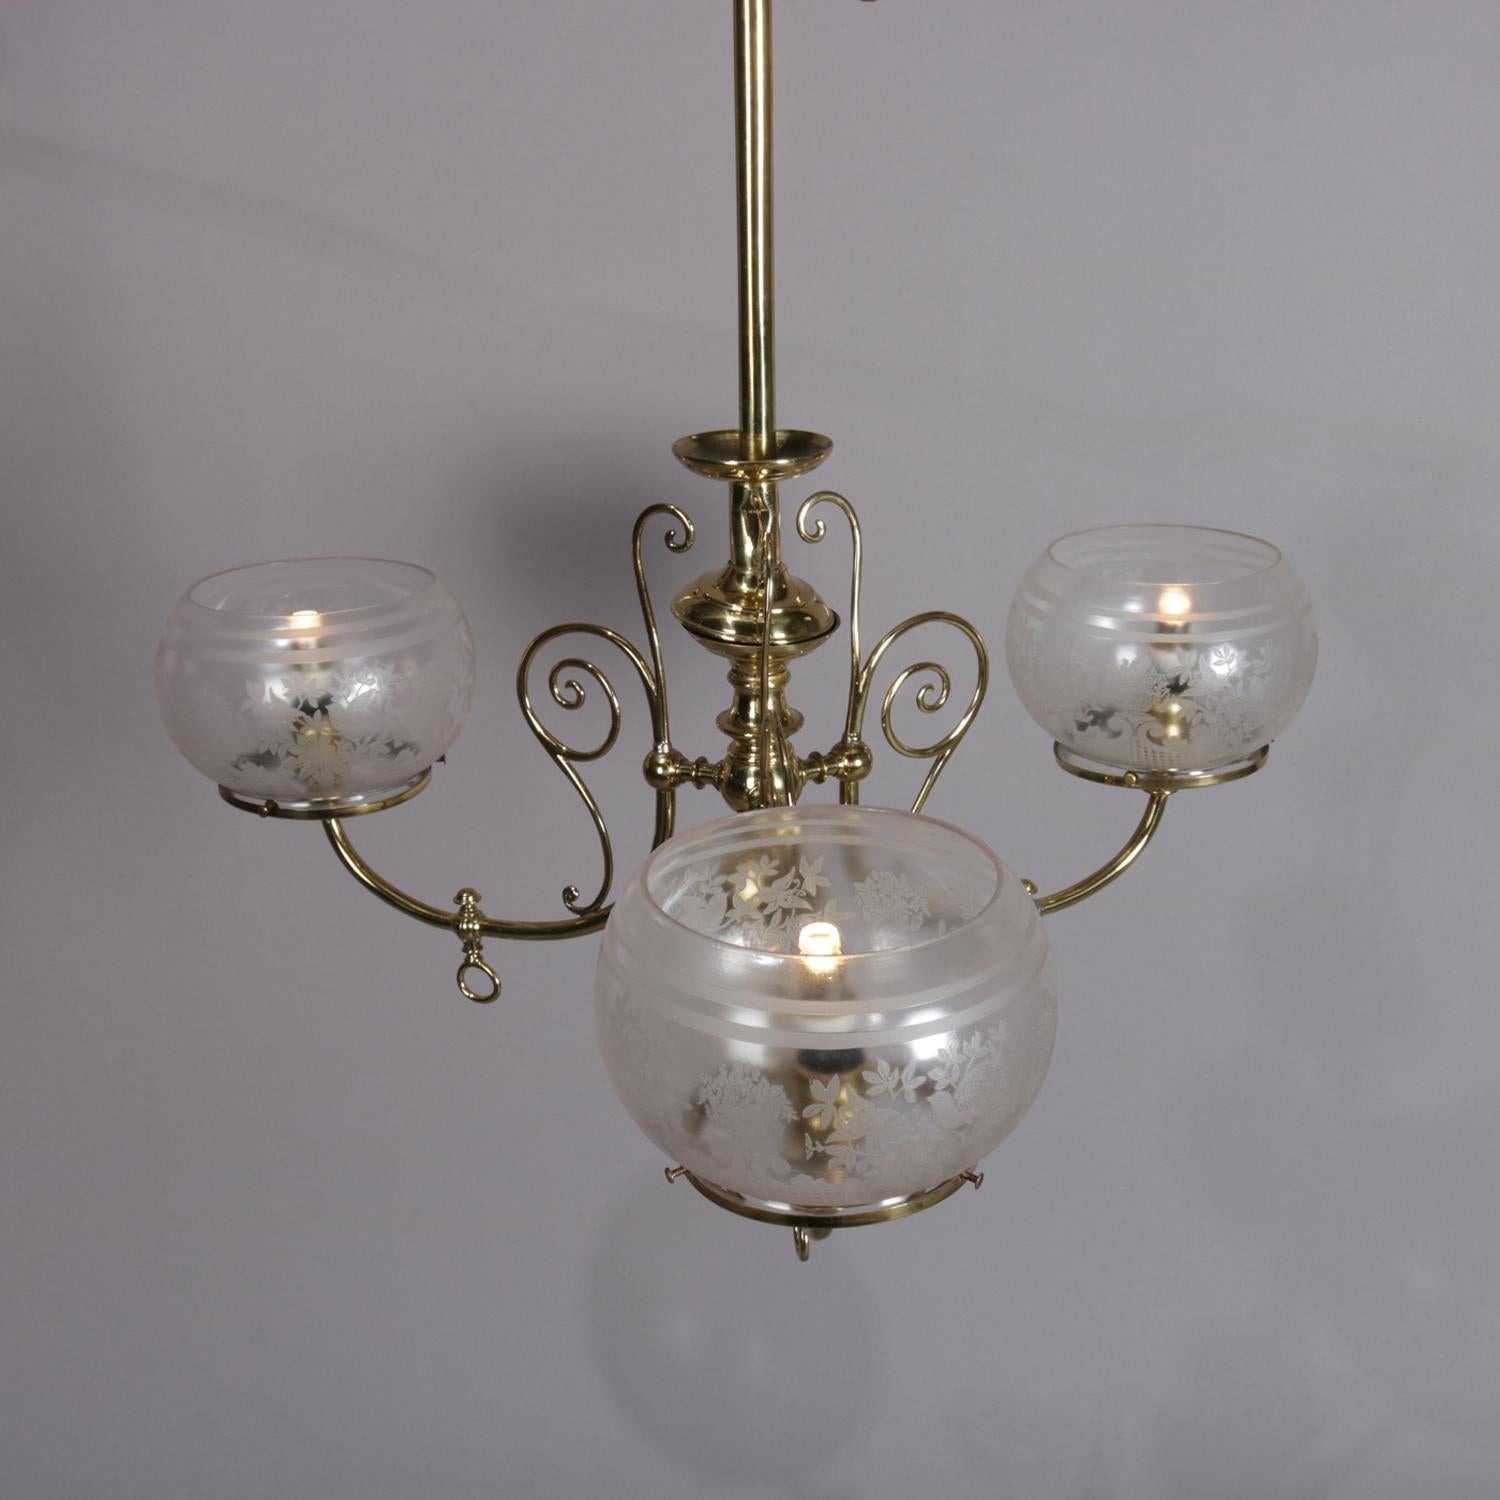 Etched Antique Victorian Brass Three-Light Electrified Gas Chandelier, Weight Driven